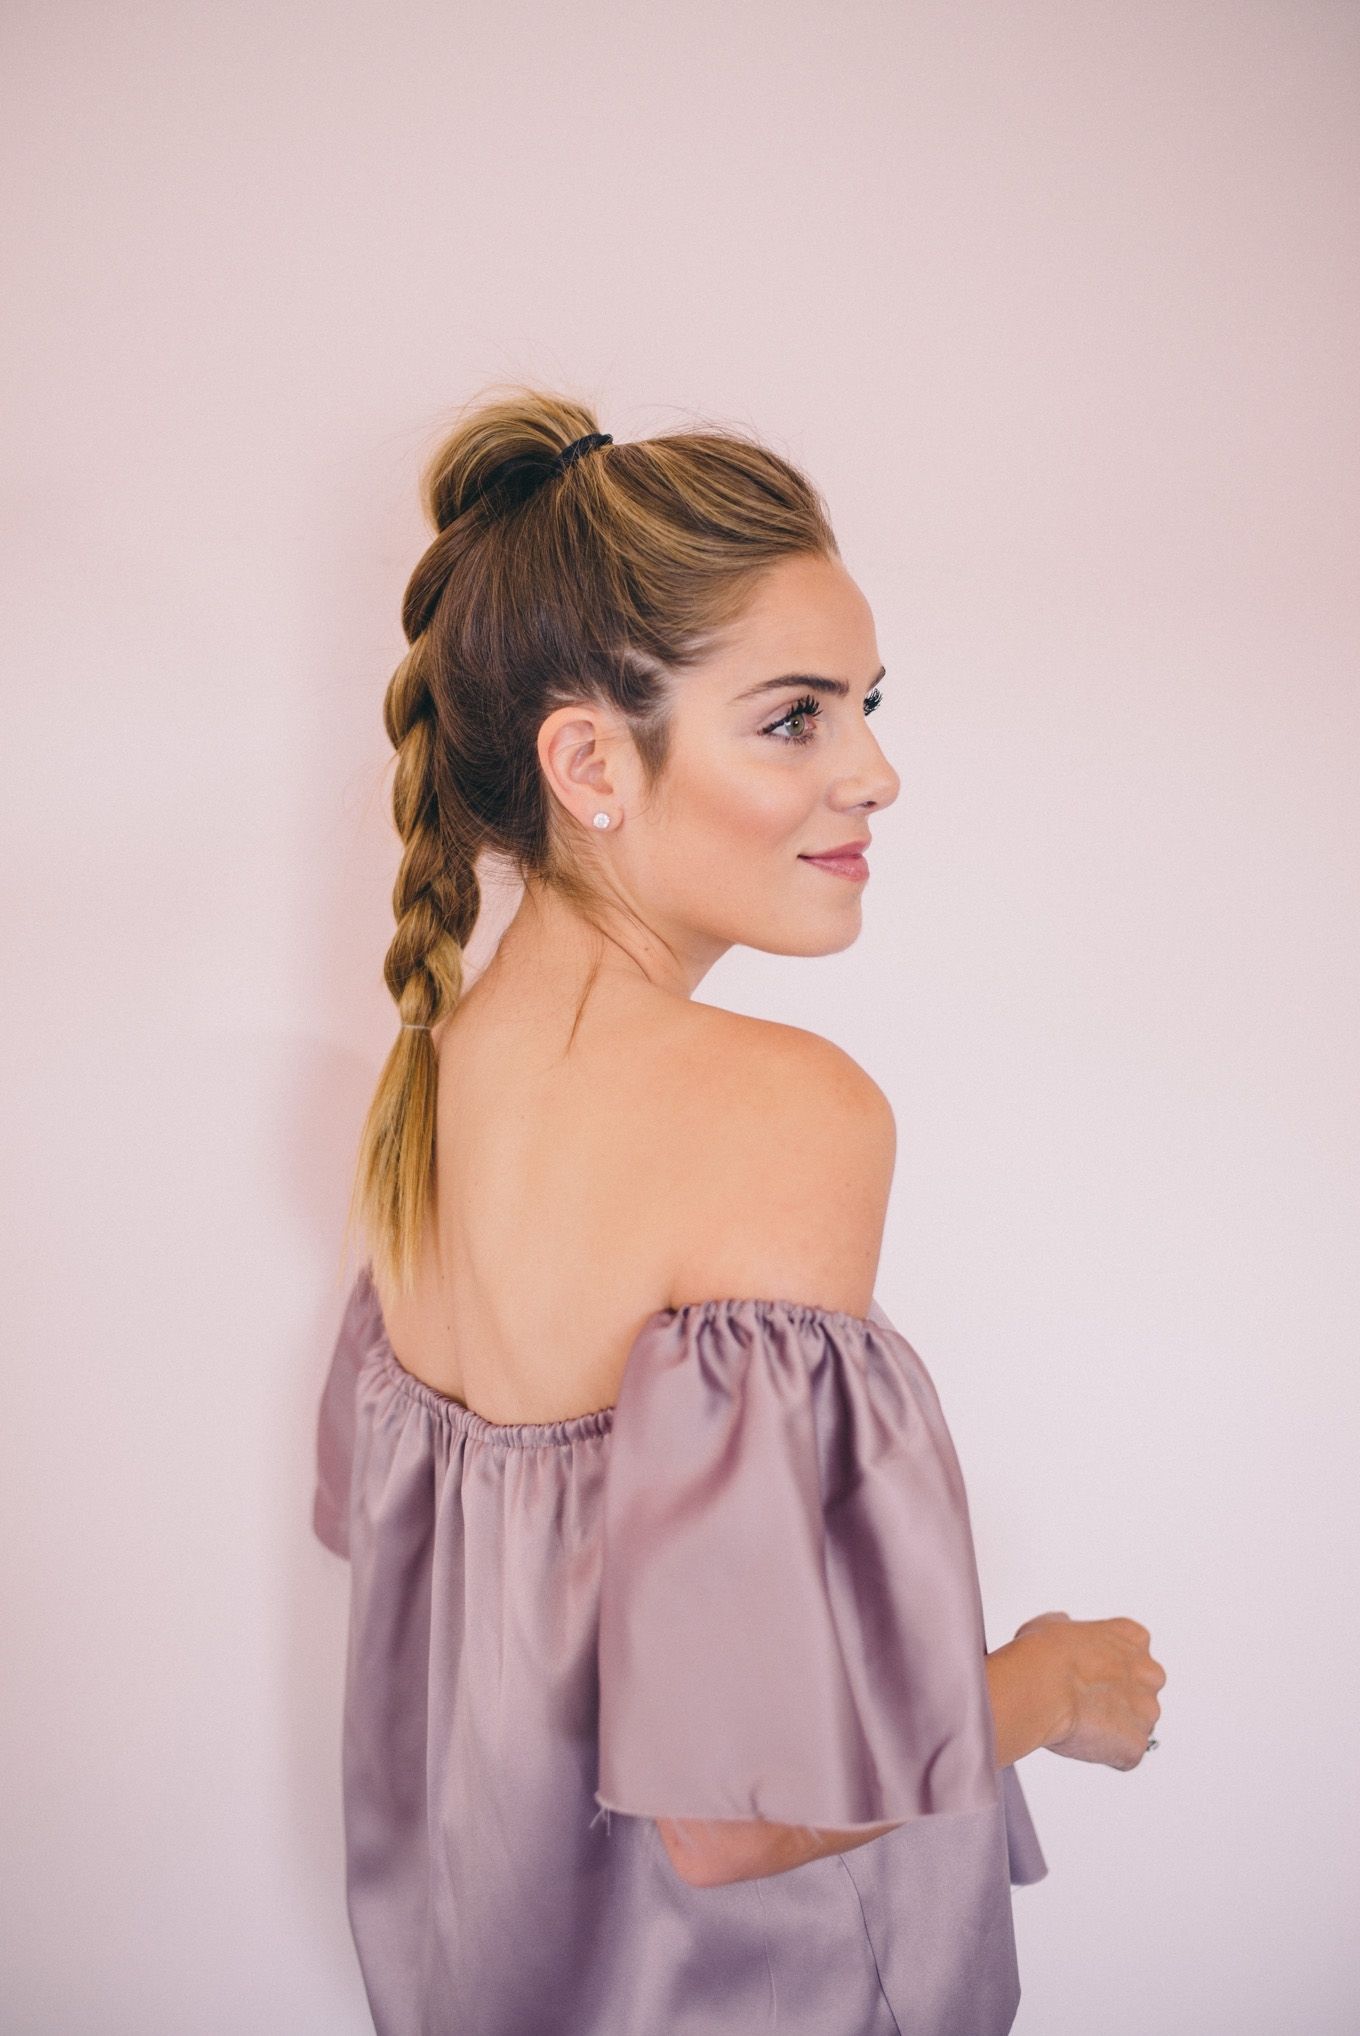 Best And Newest Glam Ponytail Hairstyles Pertaining To My Go To Warm Weather Hairstyles – Gal Meets Glam (View 20 of 20)